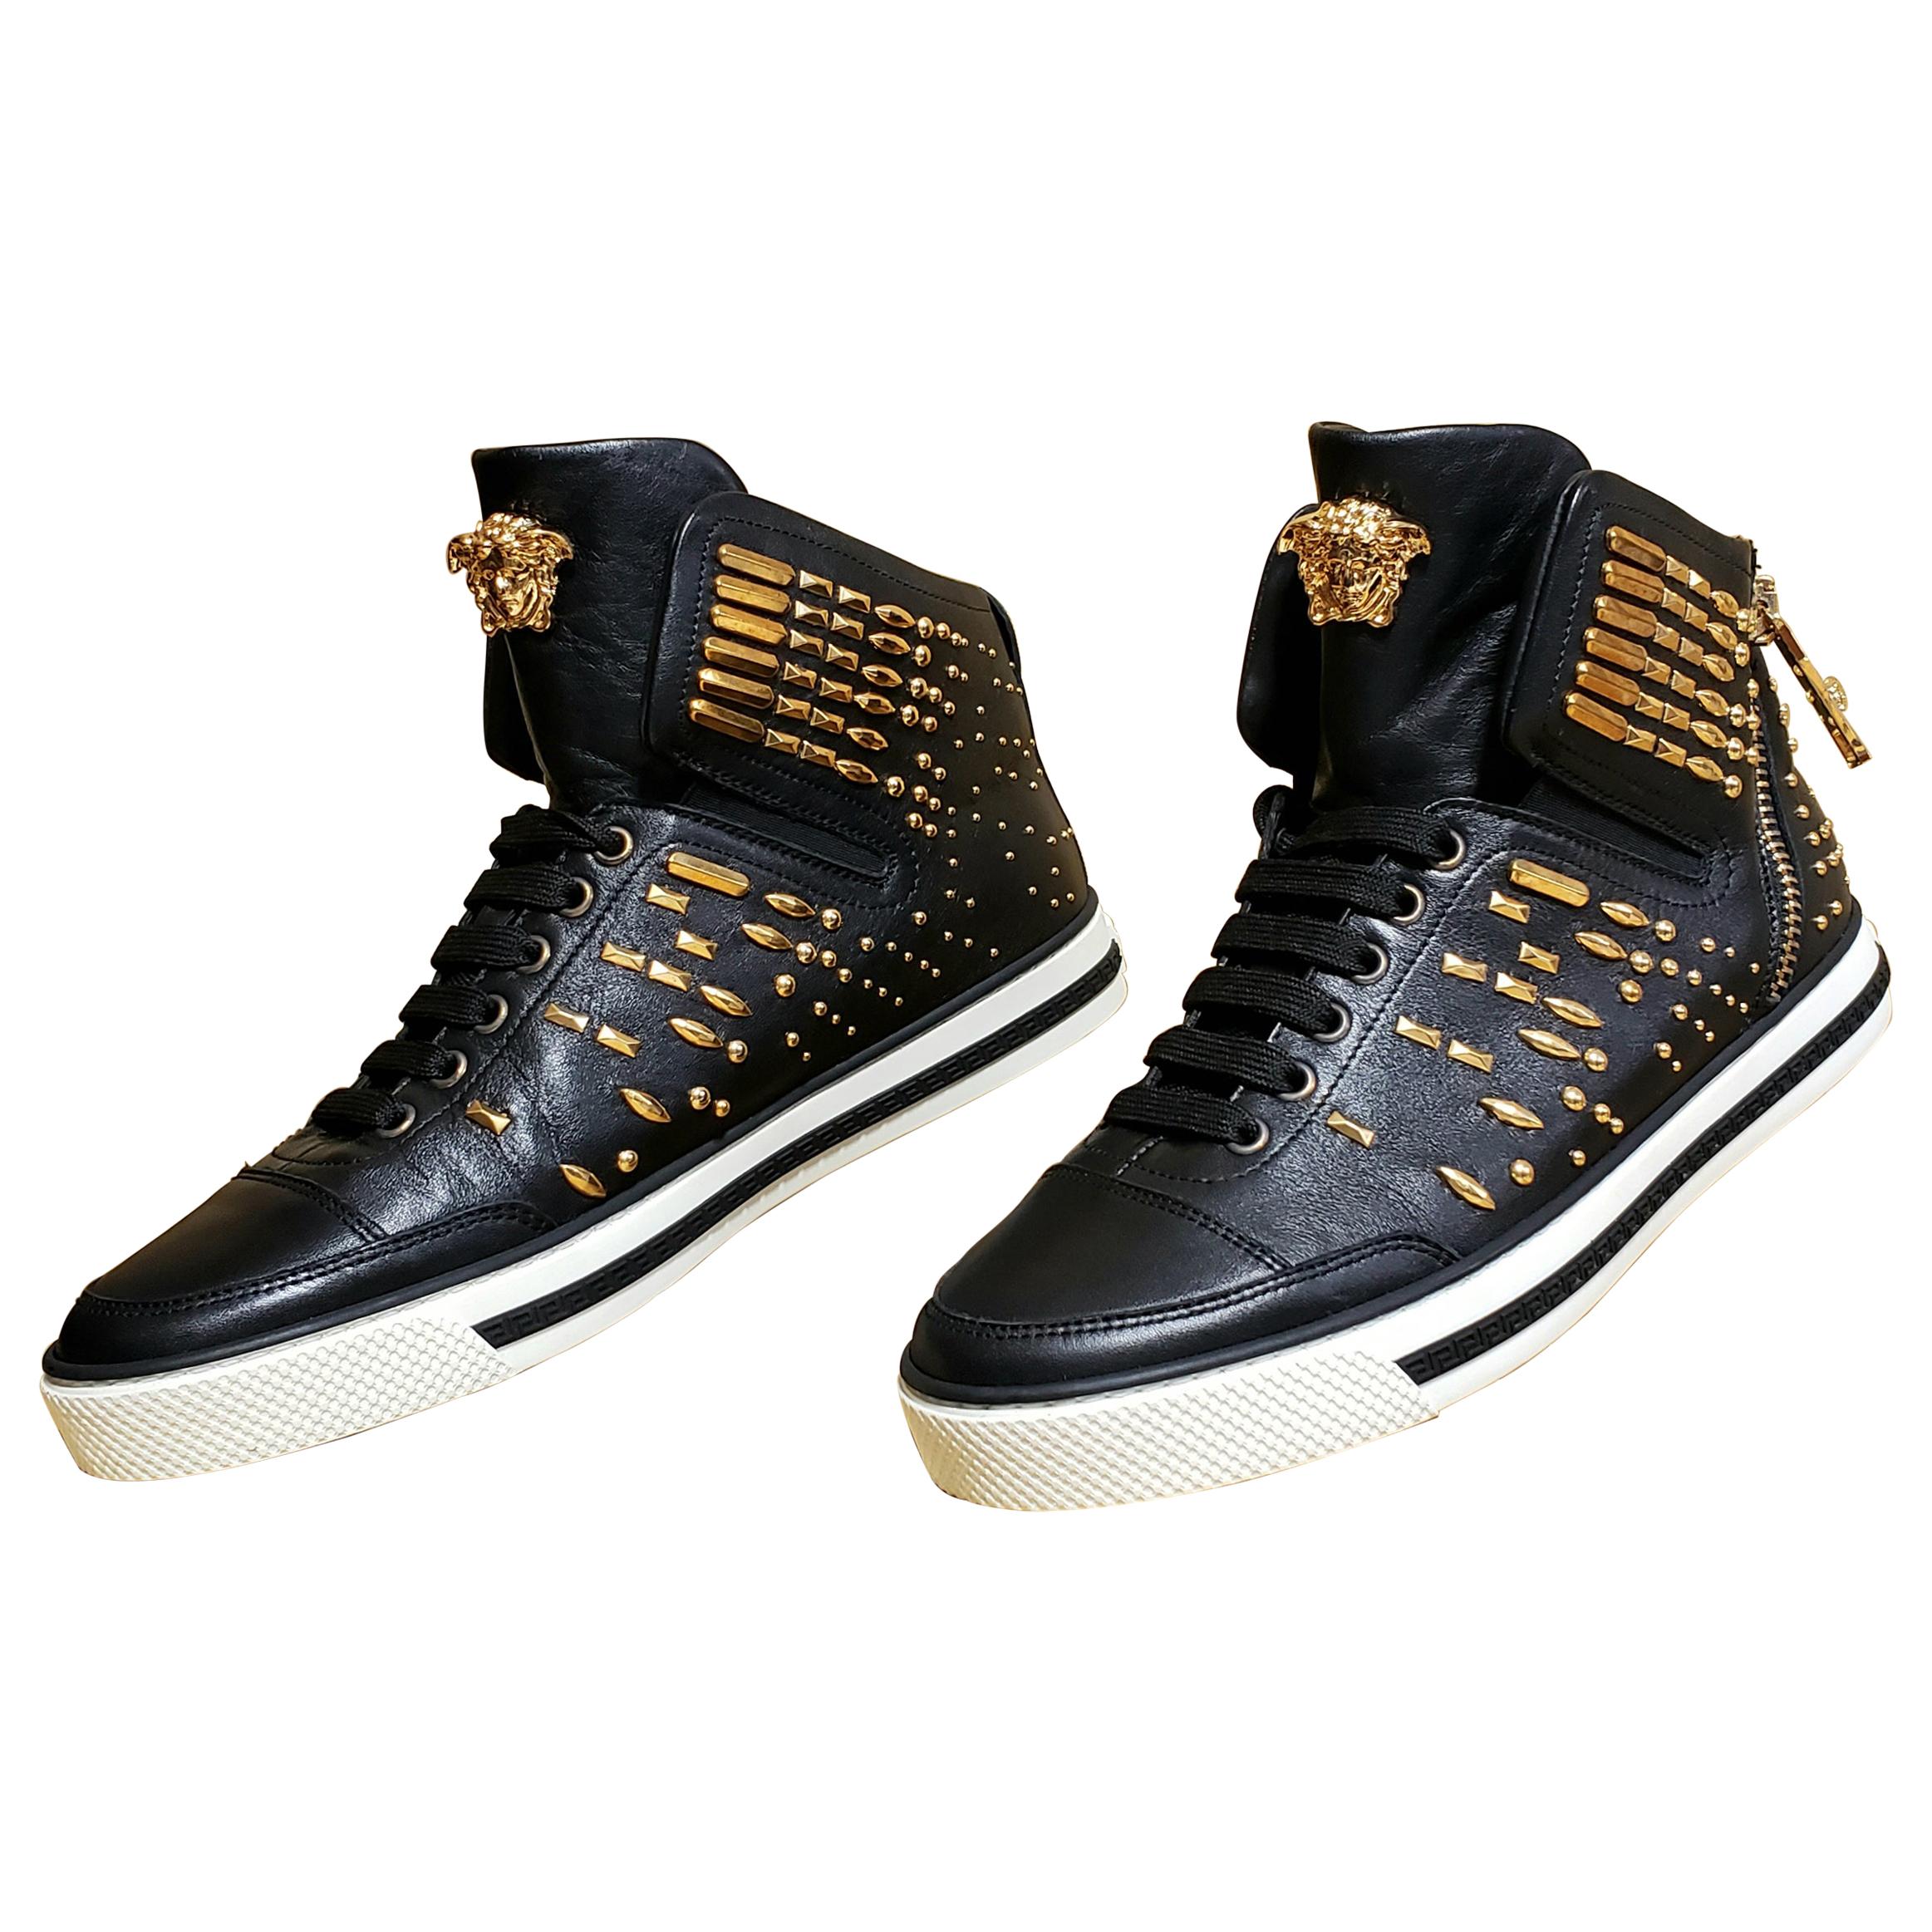 VERSACE STUDDED HIGH-TOP SNEAKERS with GOLD MEDUSA side ZIPPER at 1stDibs |  versace high top sneakers, black and gold versace shoes, black and gold  high top sneakers